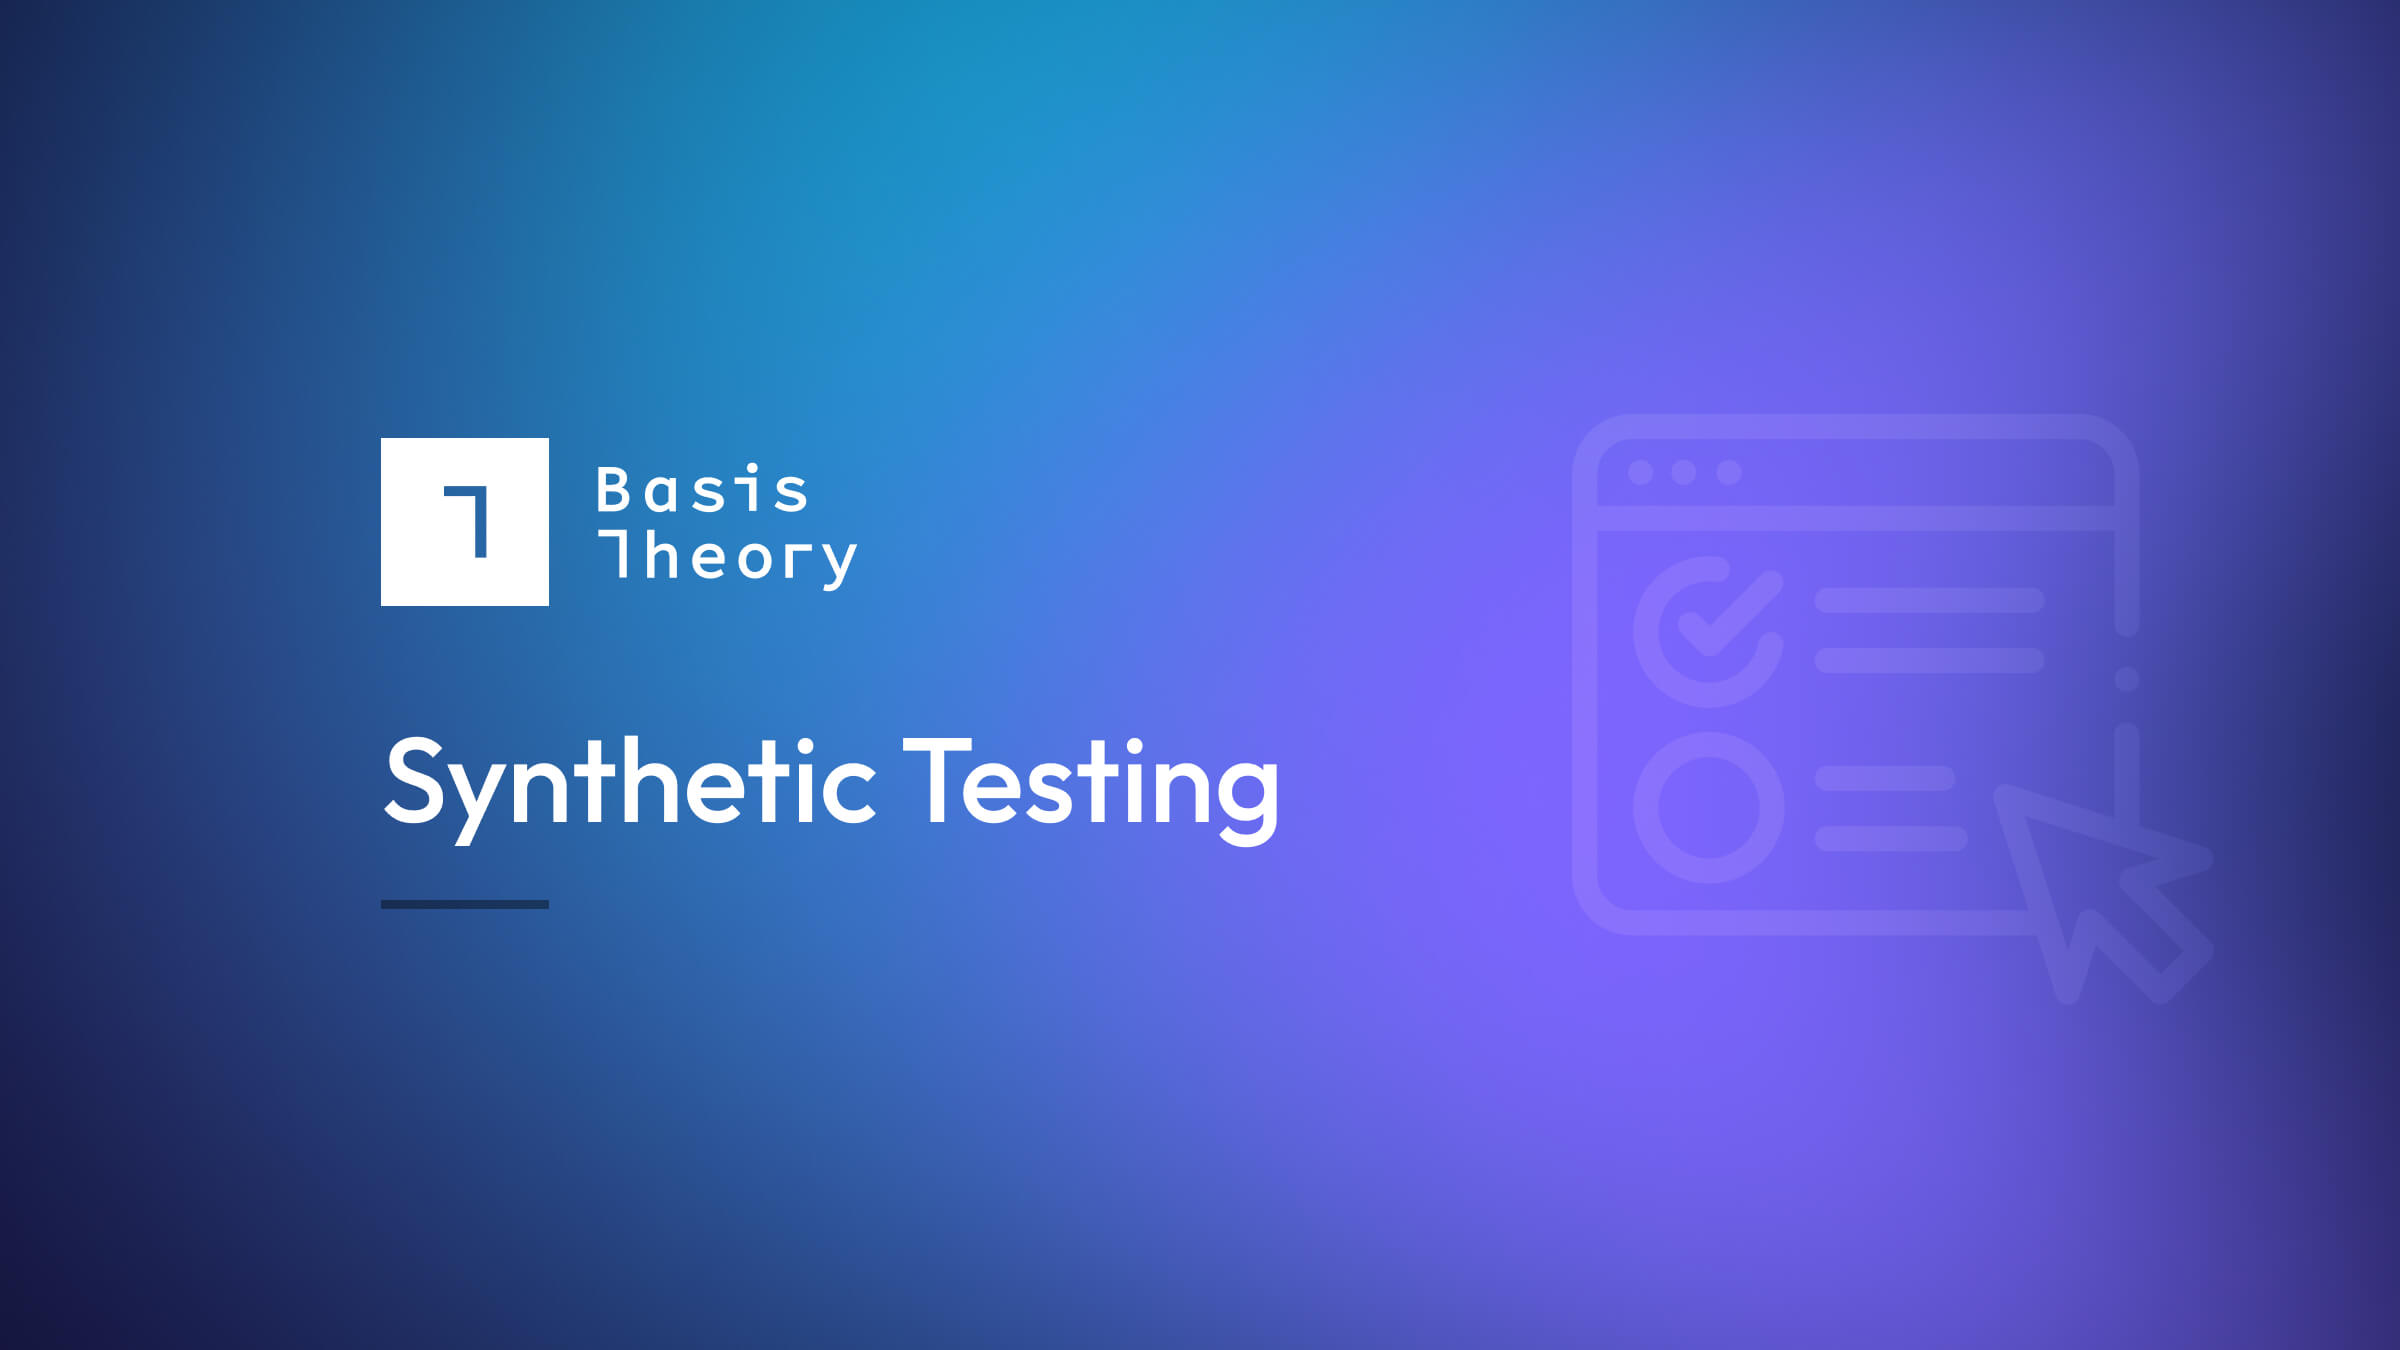 Synthetic testing